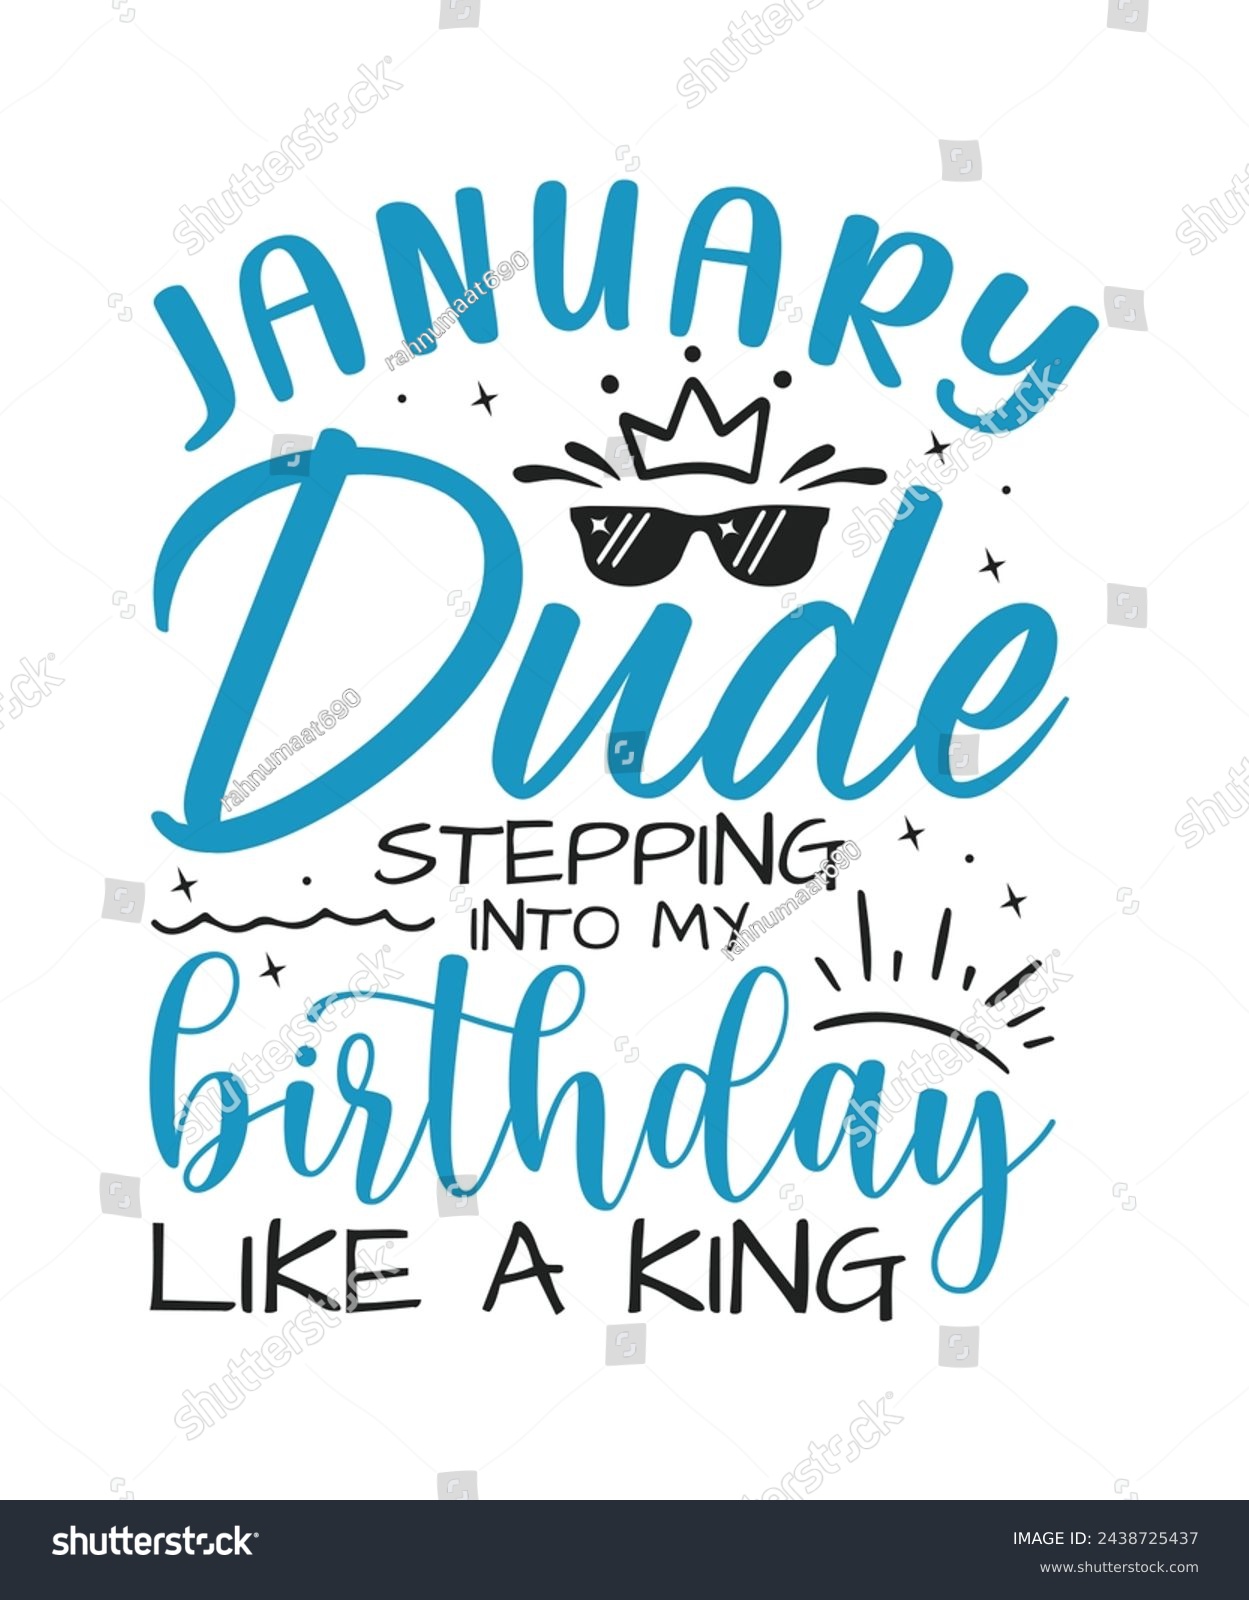 SVG of January dude birthday king design Happy birthday quote designs svg